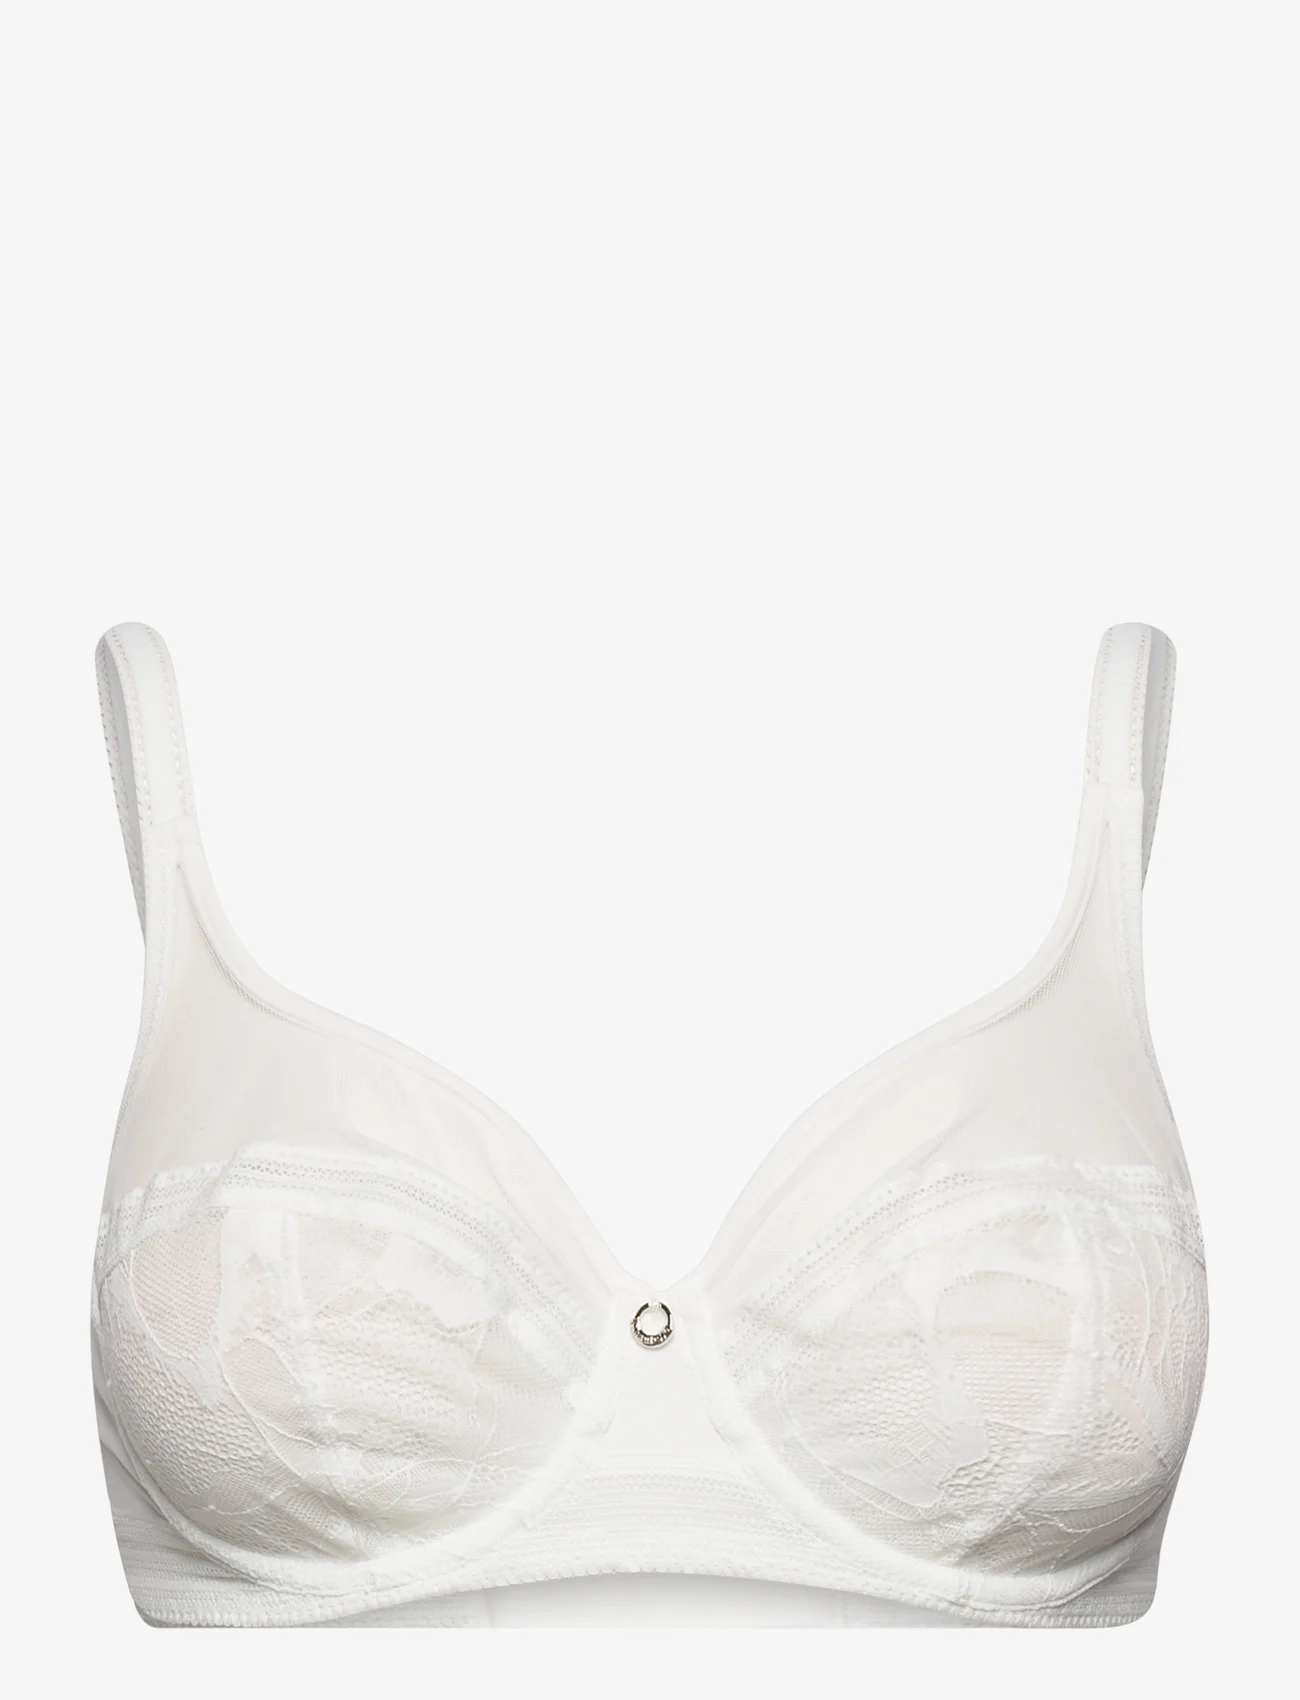 CHANTELLE - CORSETRY BRA UNDERWIRED VERY COVERING - spile-bh-er - milk - 0